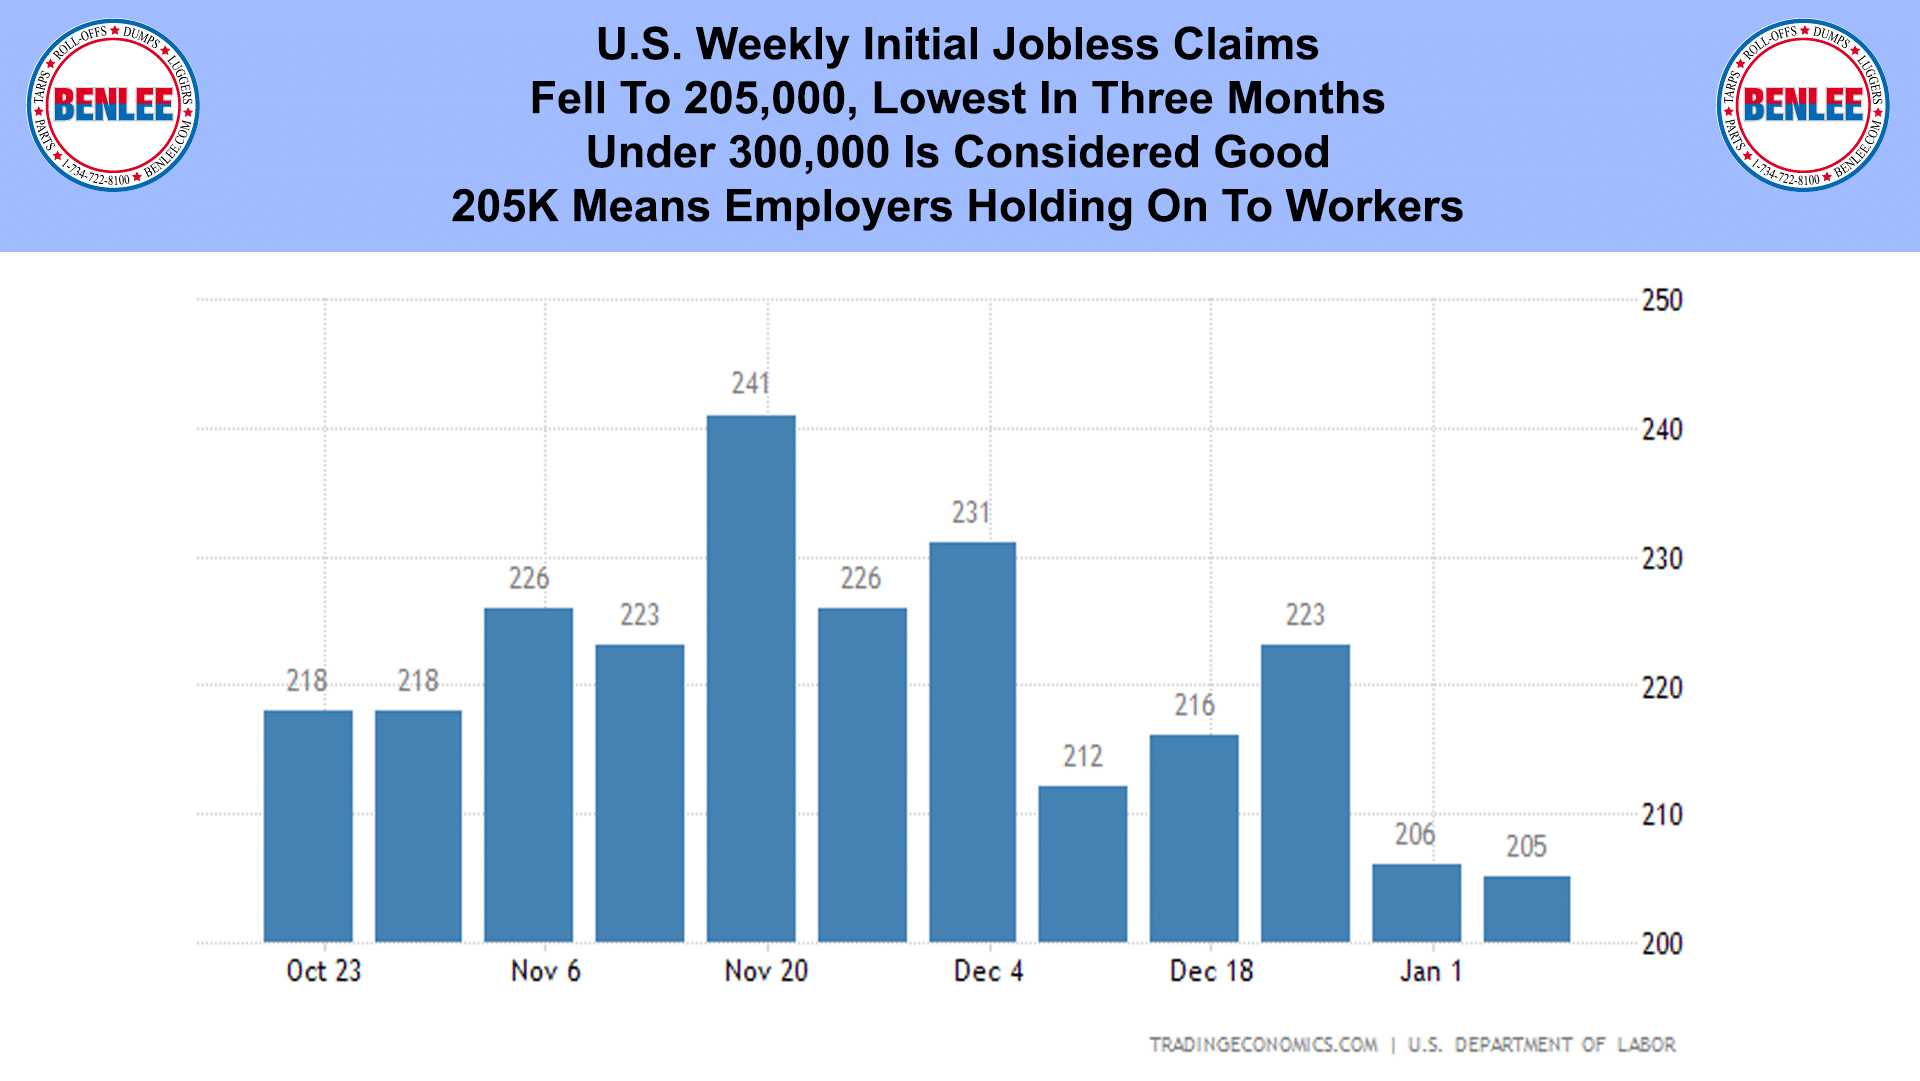 U.S. Weekly Initial Jobless Claims